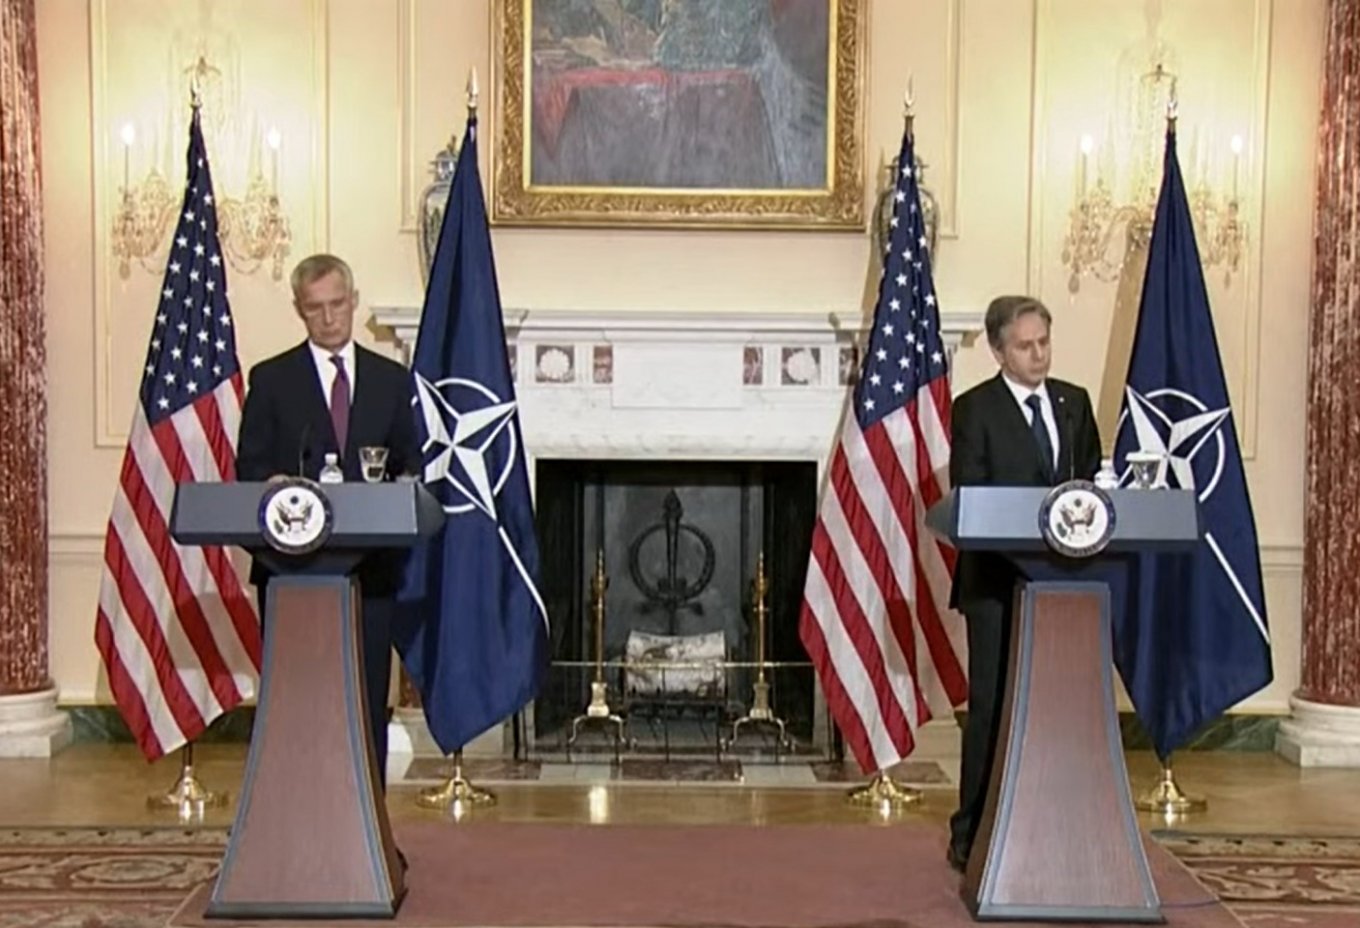 The US secretary of state, Antony Blinken and Nato’s secretary general, Jens Stoltenberg at a joint news conference on Wednesday, June 1, Defense Express